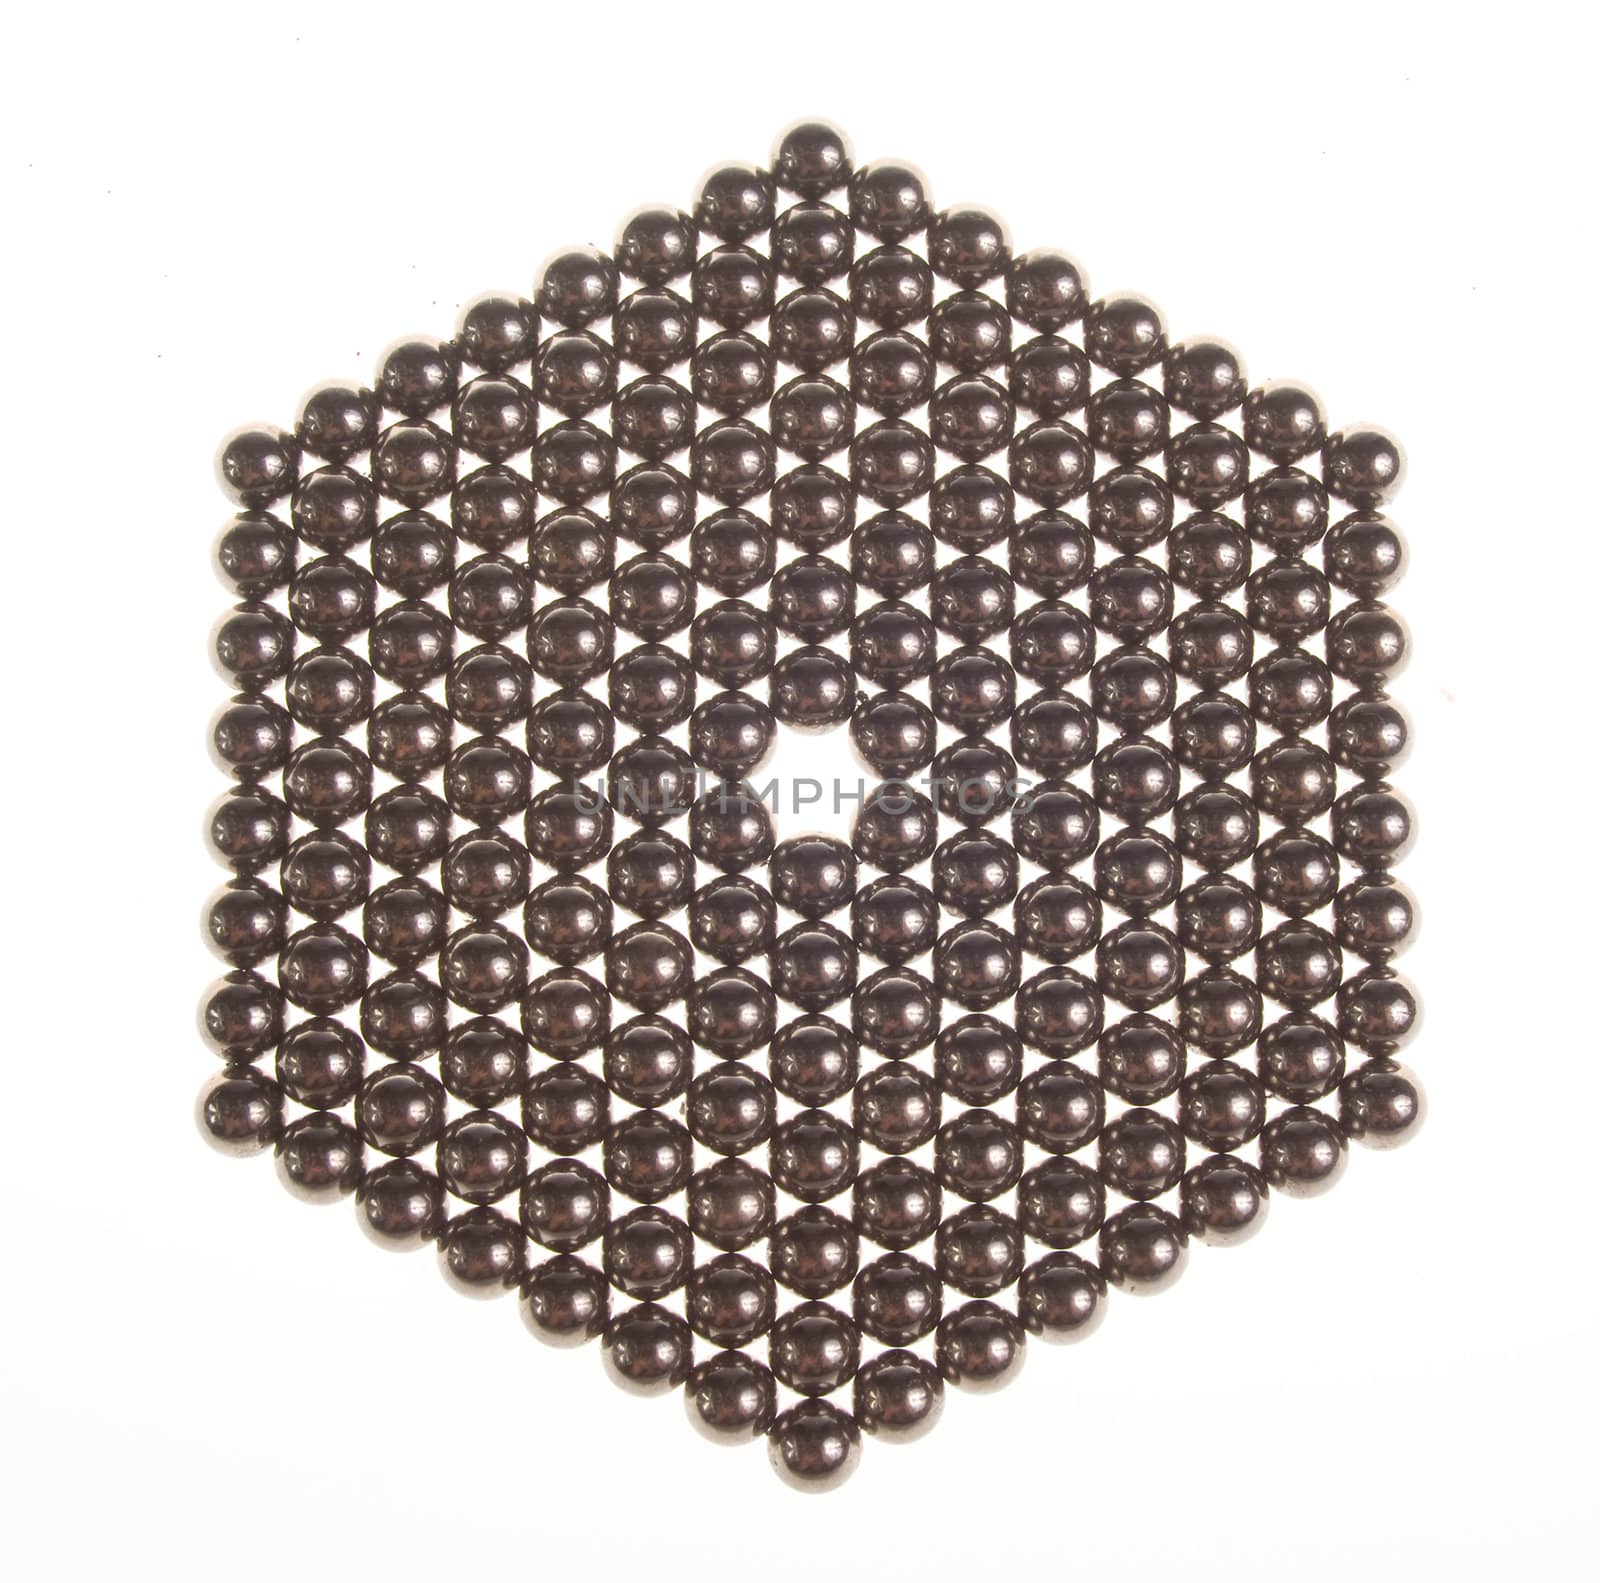 Hexagon of small metal balls on the white background by BIG_TAU